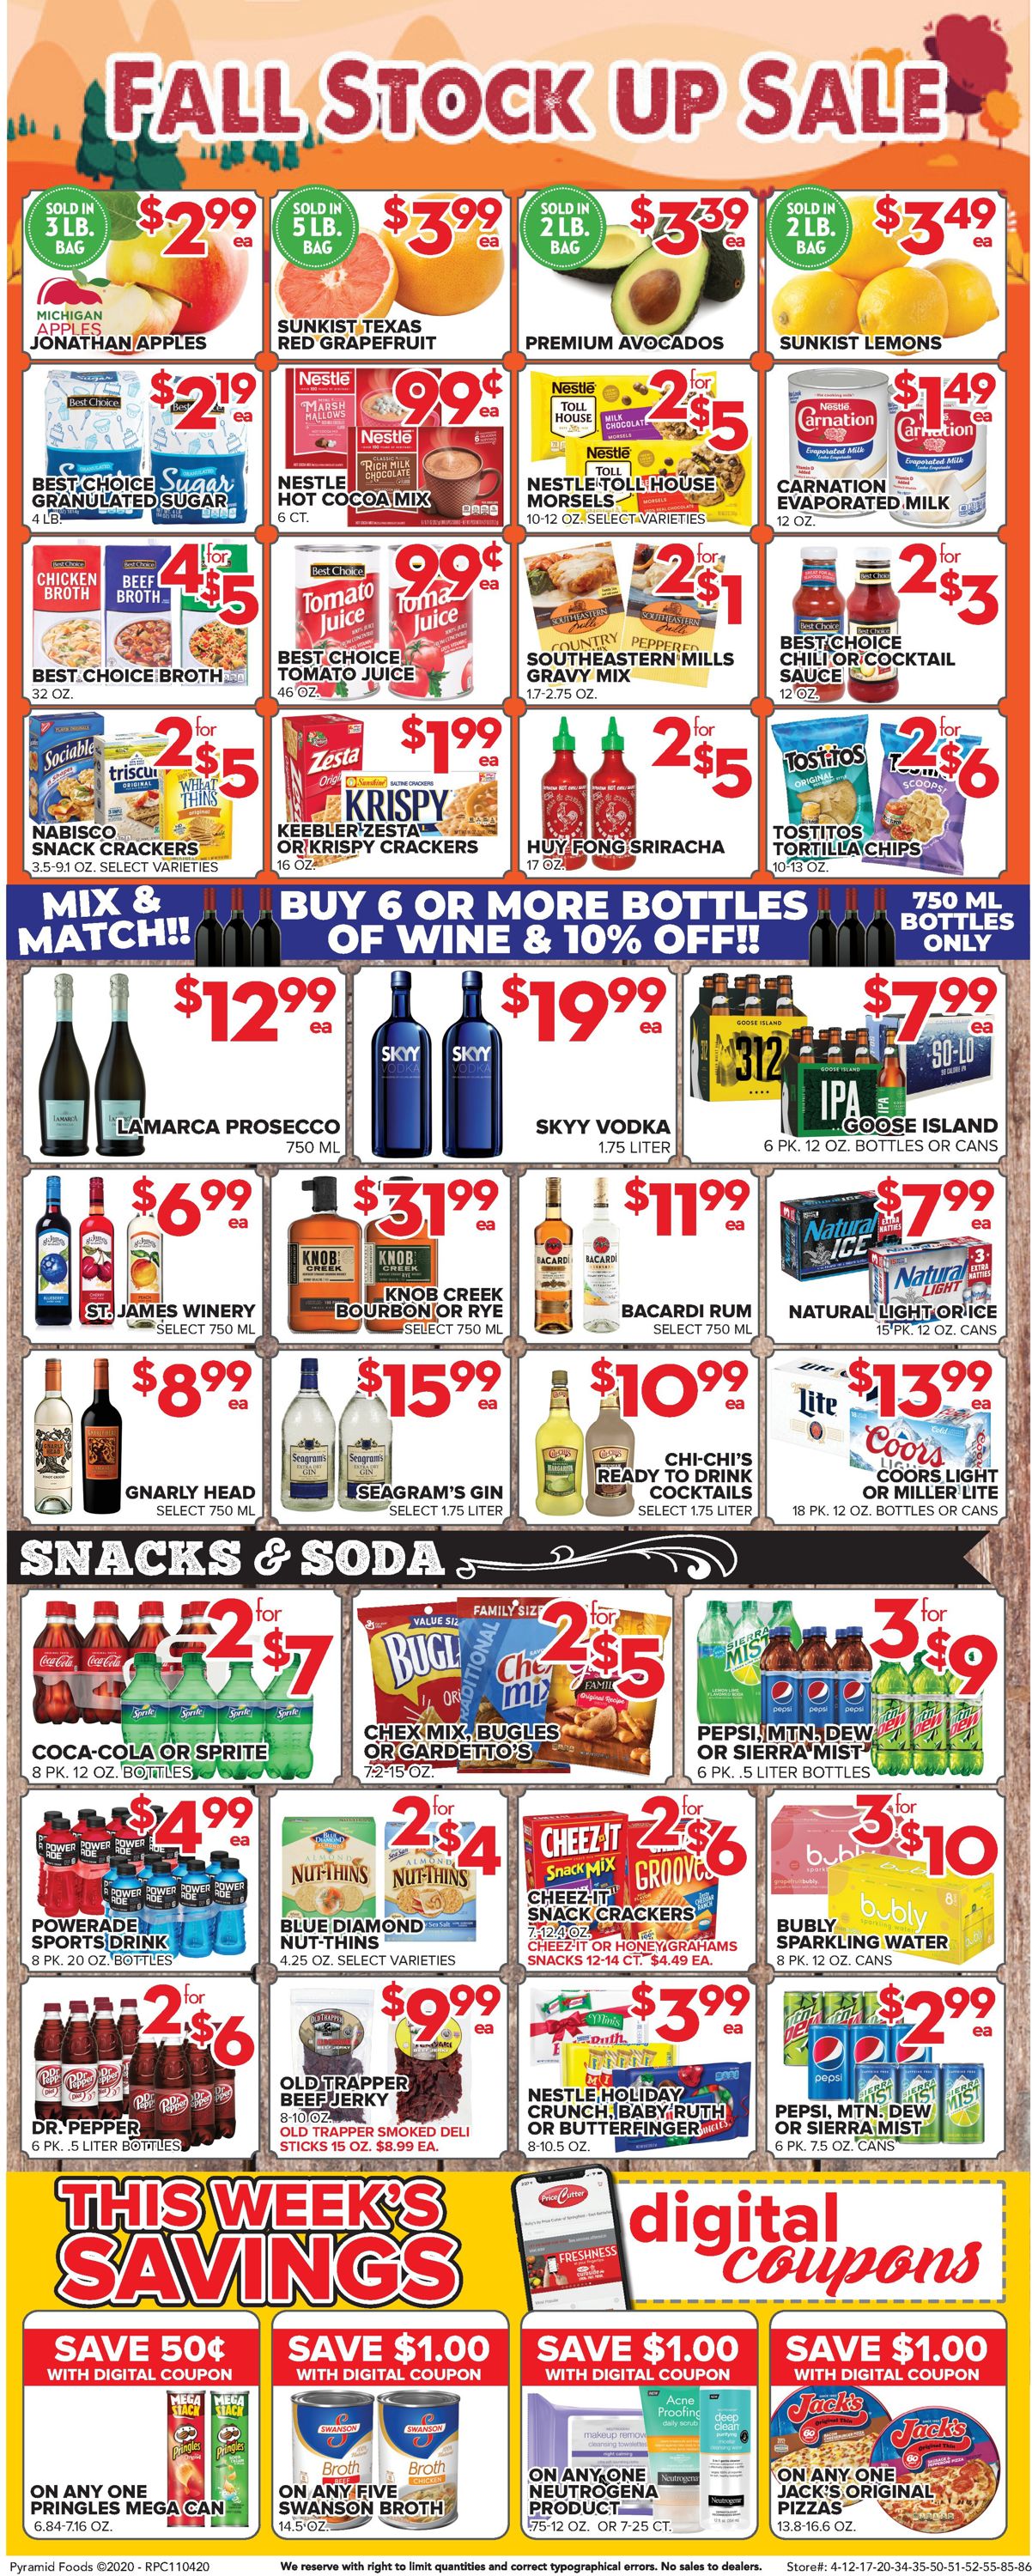 Price Cutter Weekly Ad Circular - valid 11/04-11/10/2020 (Page 4)